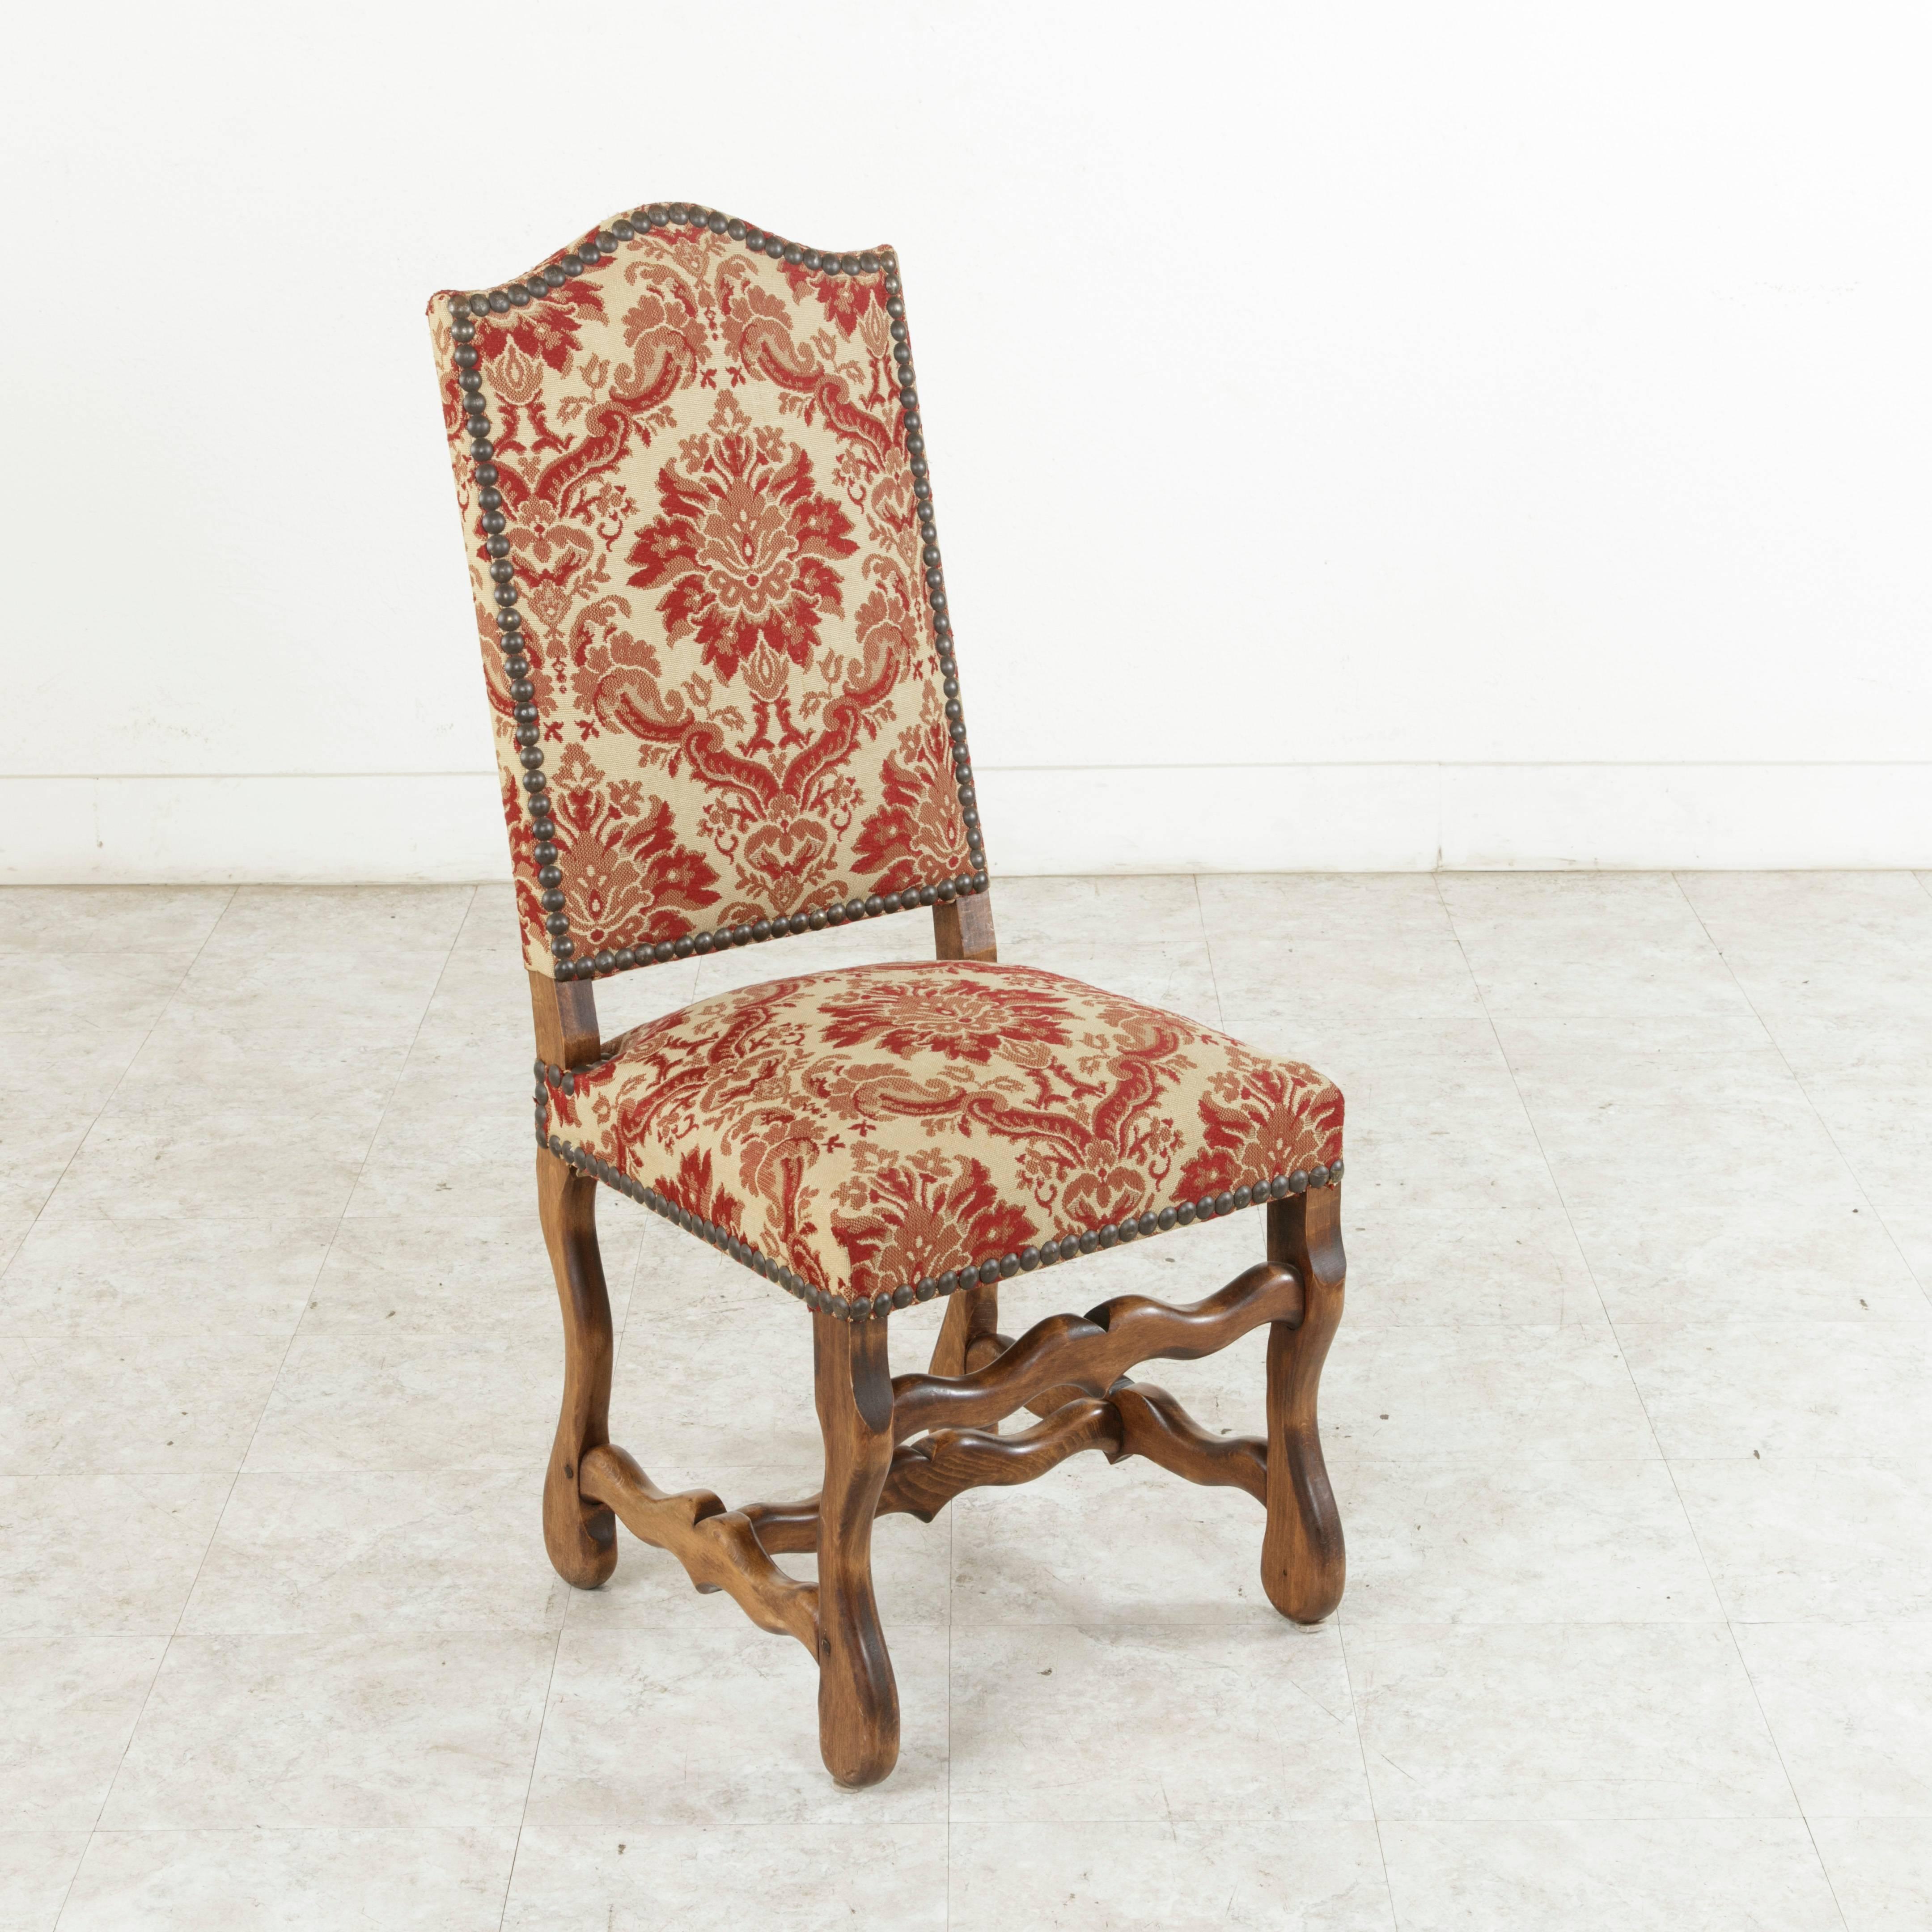 This set of six French ash mutton leg side chairs or dining chairs from the mid-20th century are of hand pegged construction and feature a rich aged patina. Upholstered in a red tapestry and finished with nailhead trim, these chairs are ready to be